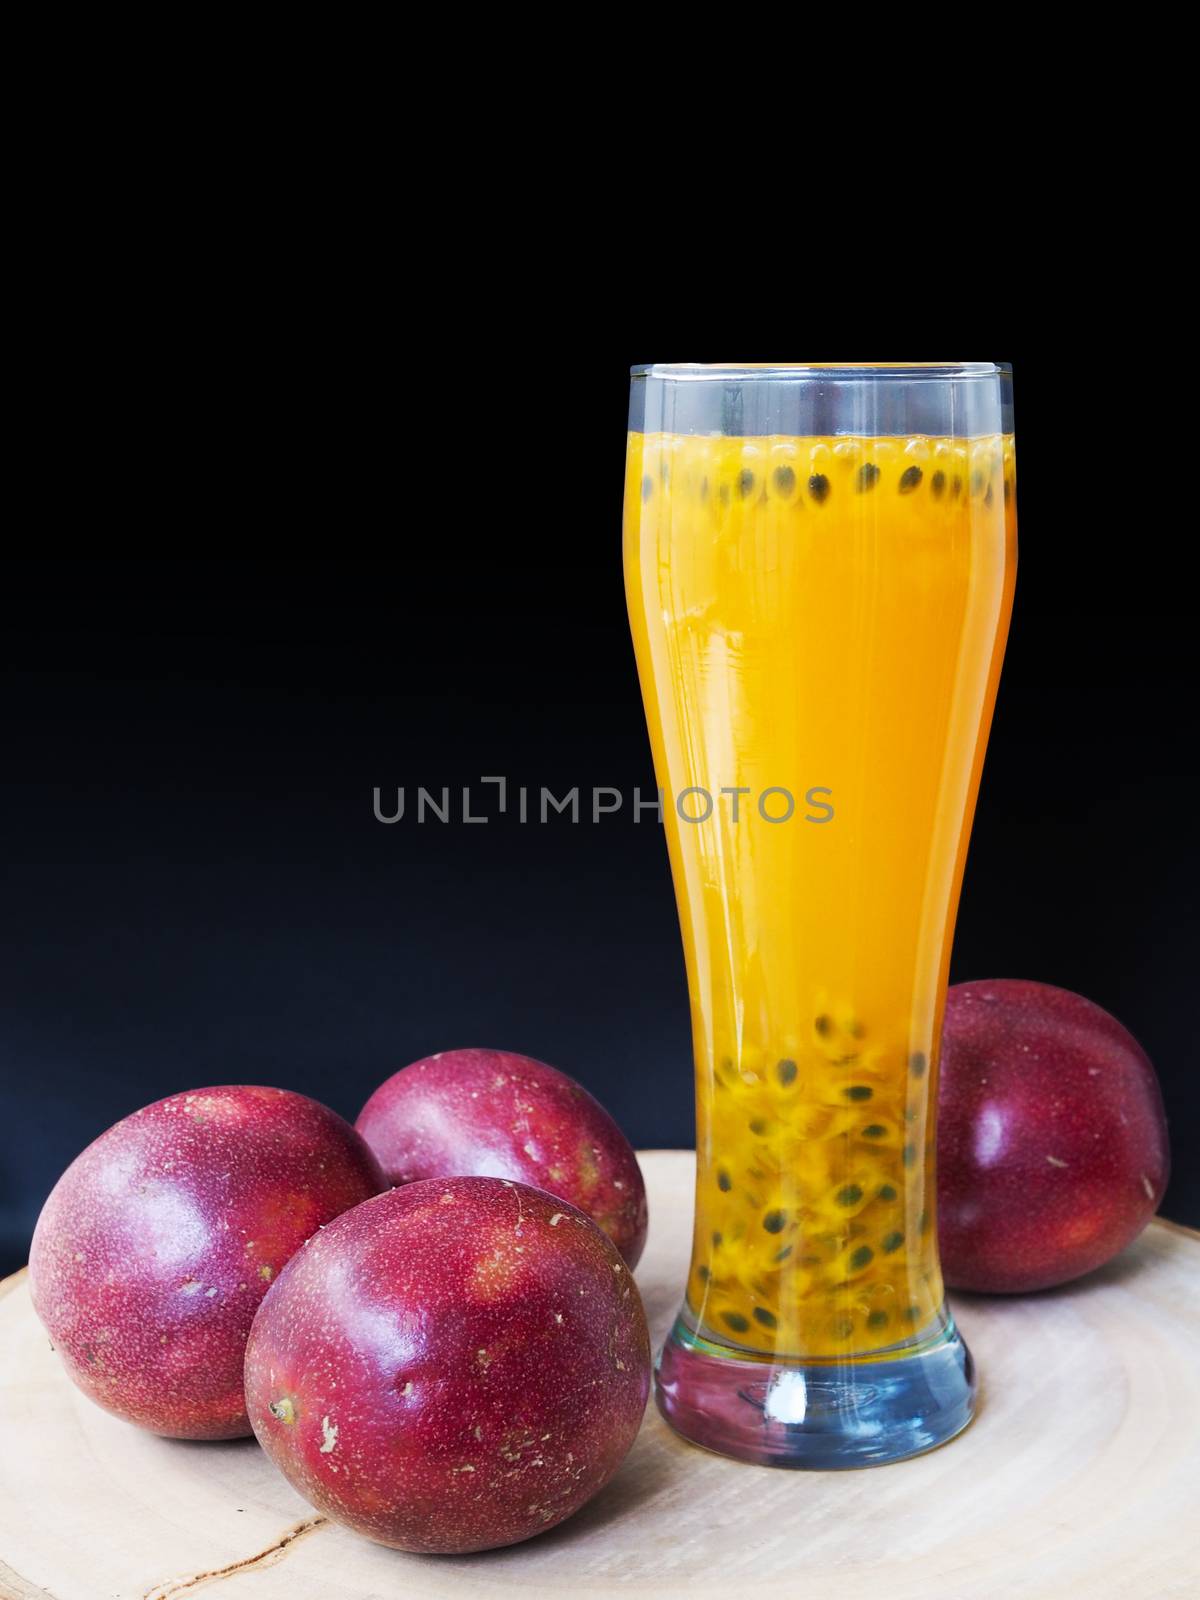 Refreshing drink with yellow juice in a glass made from passion fruit, bright red color on black background.